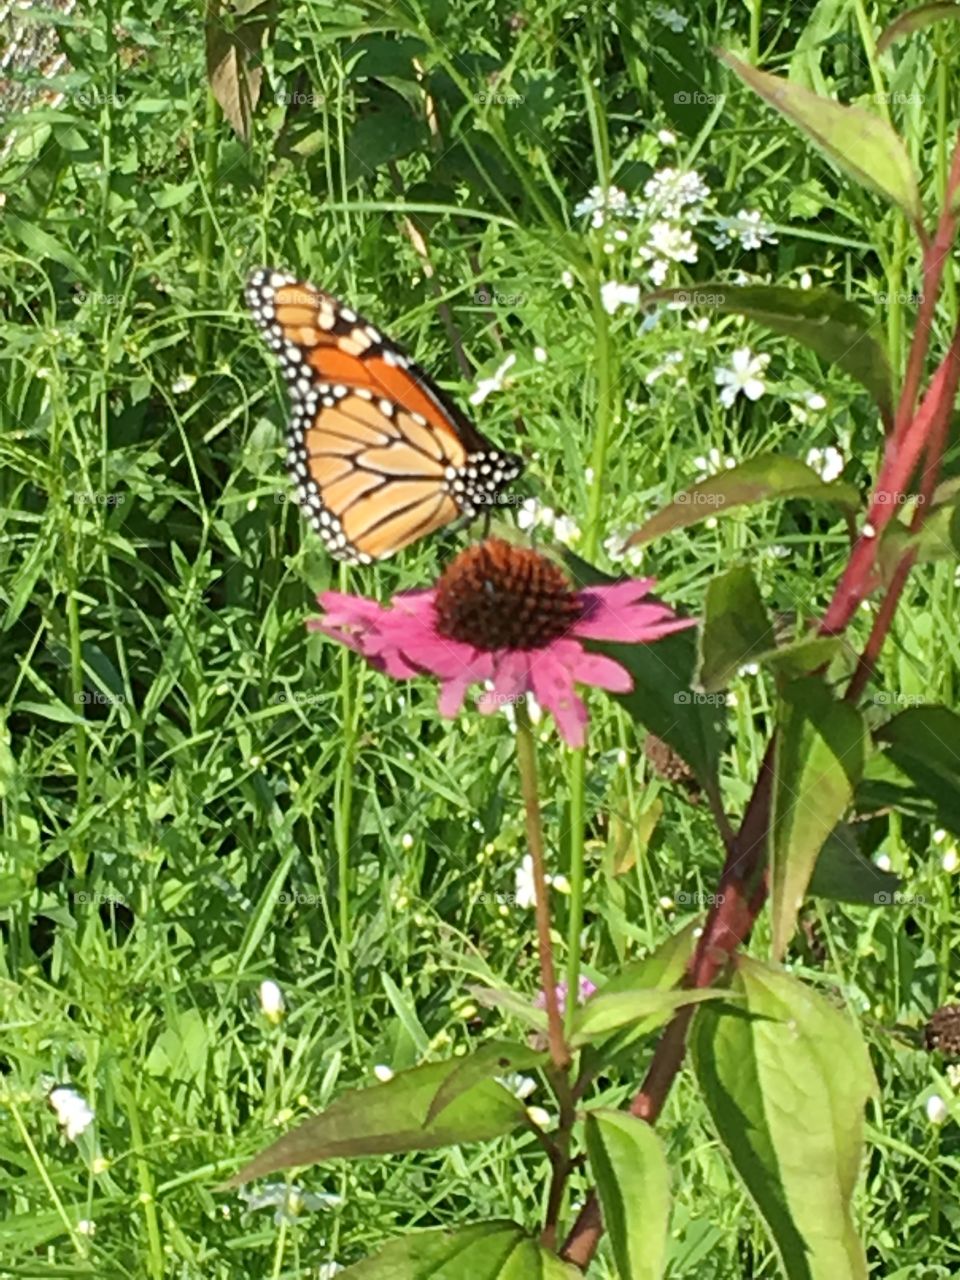 Monarch butterfly on a cone flower